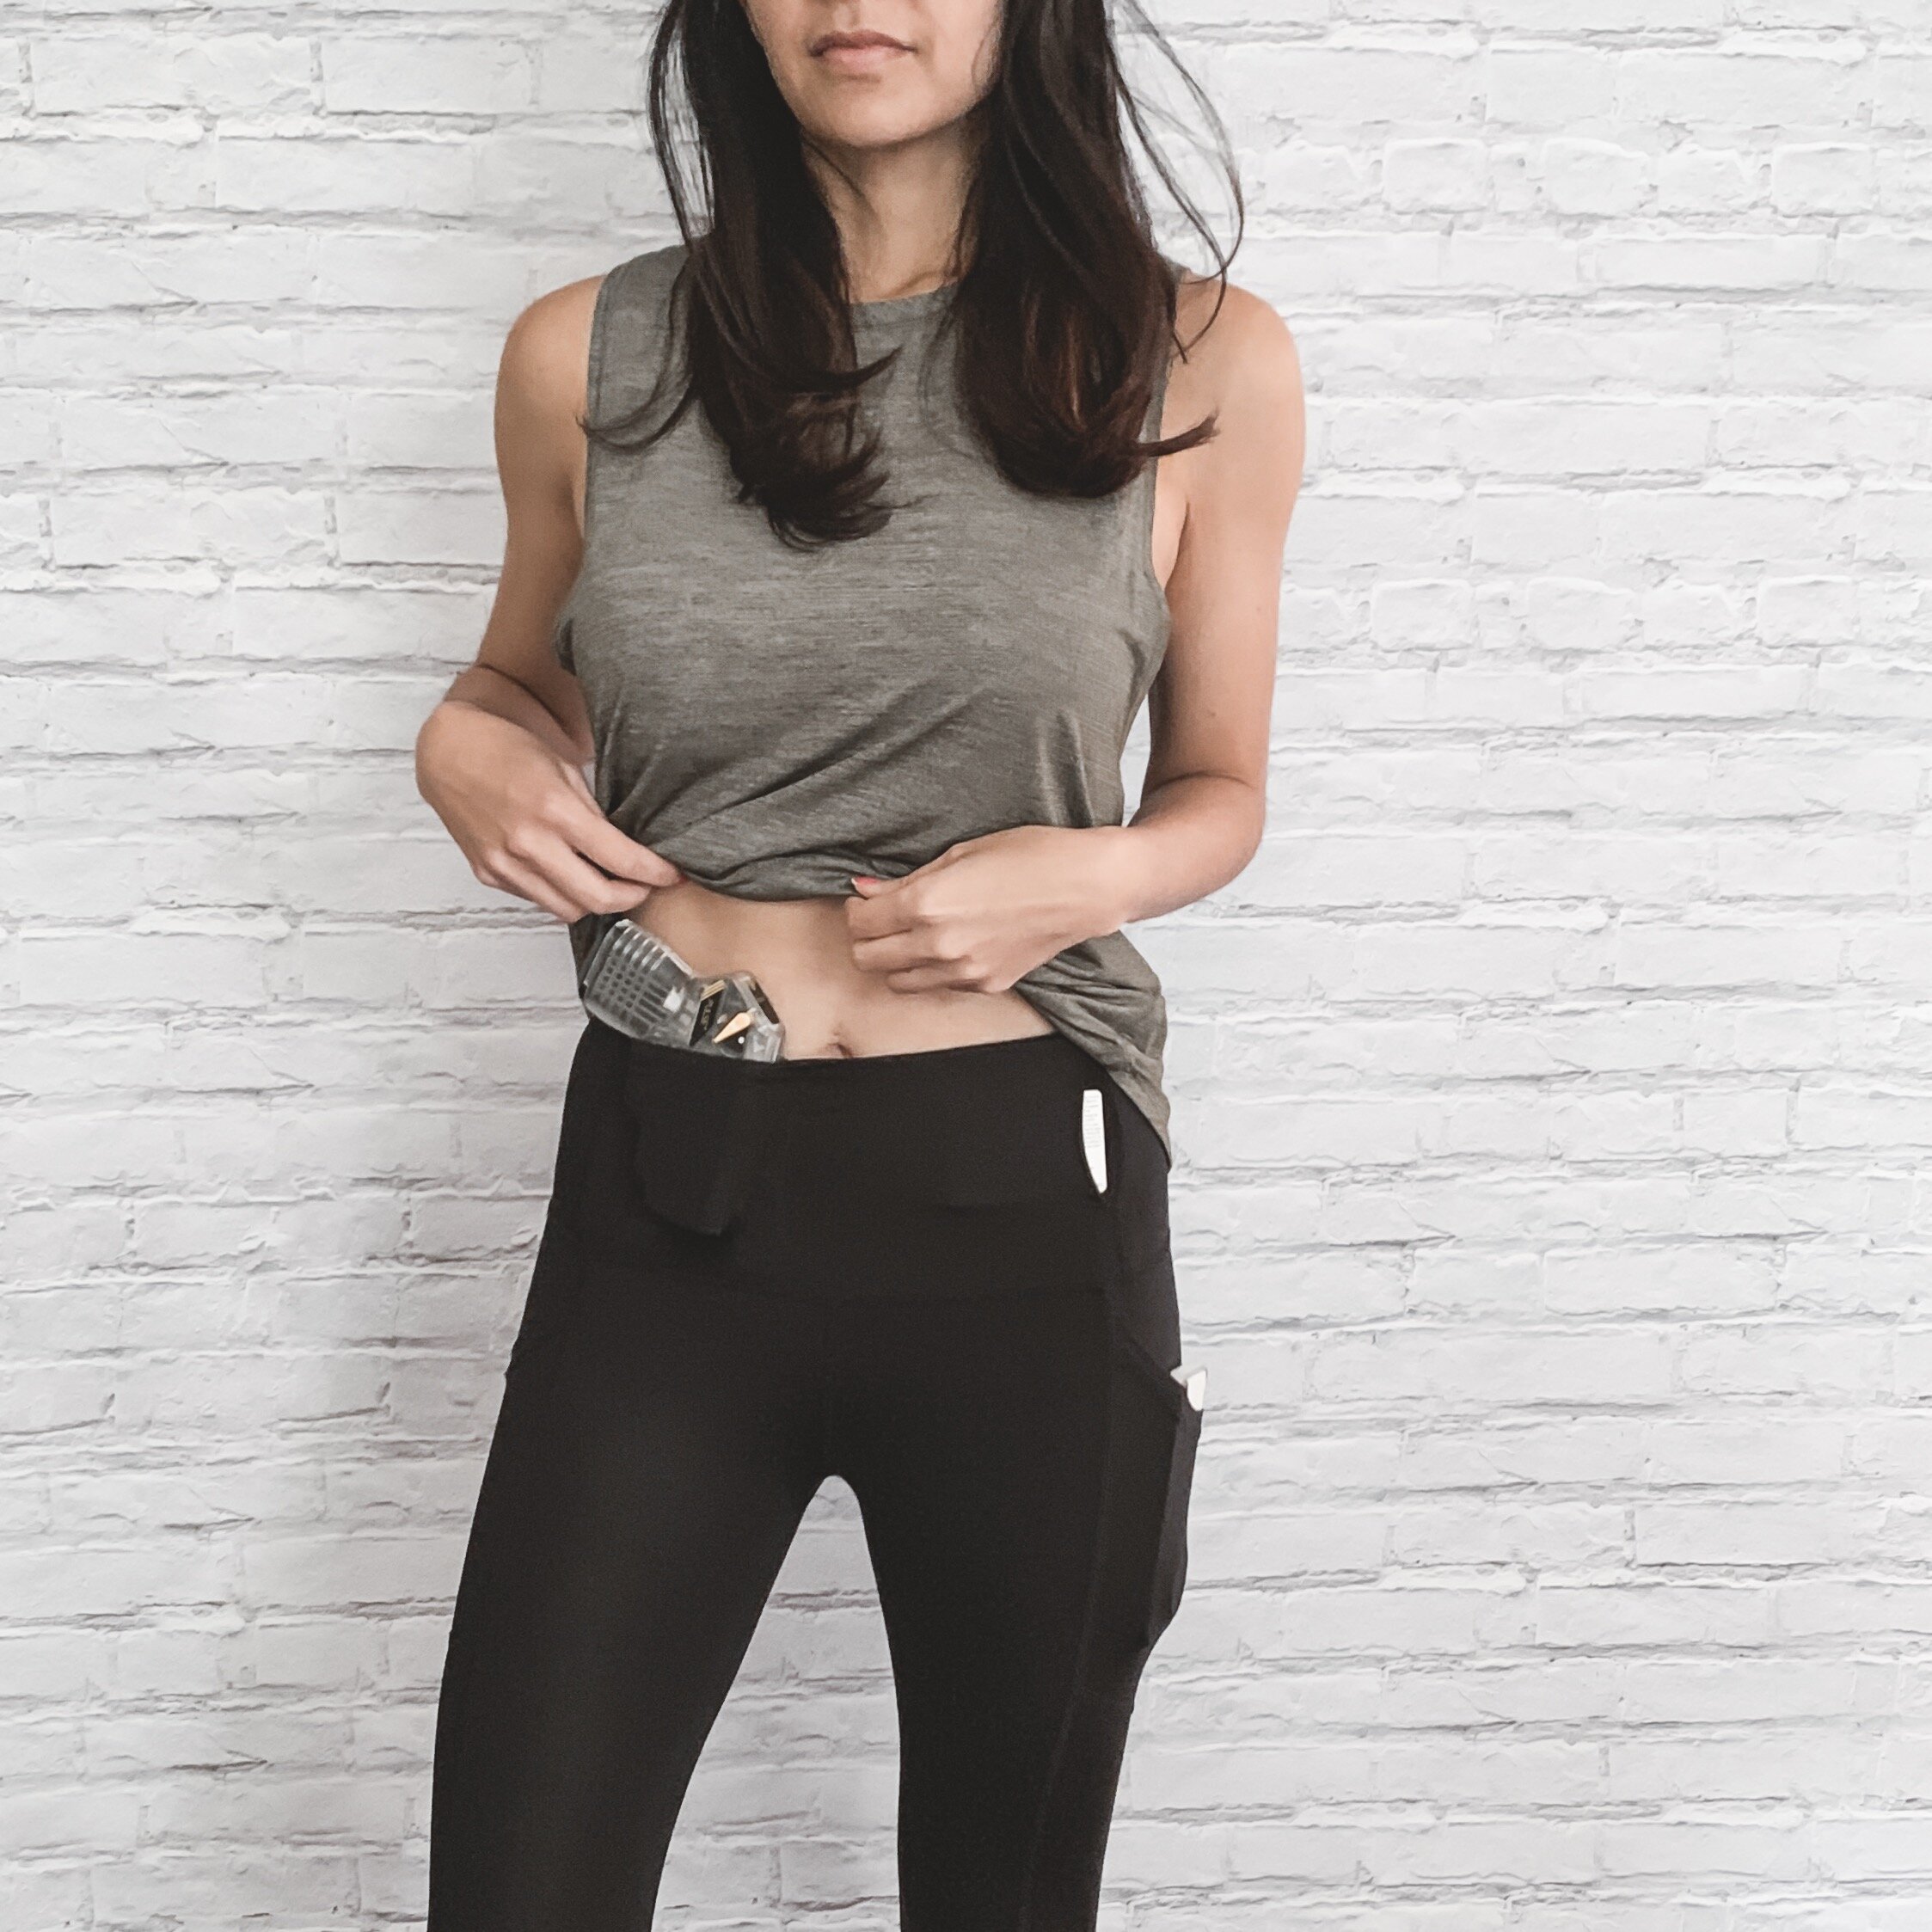 The Best Concealed Carry Leggings